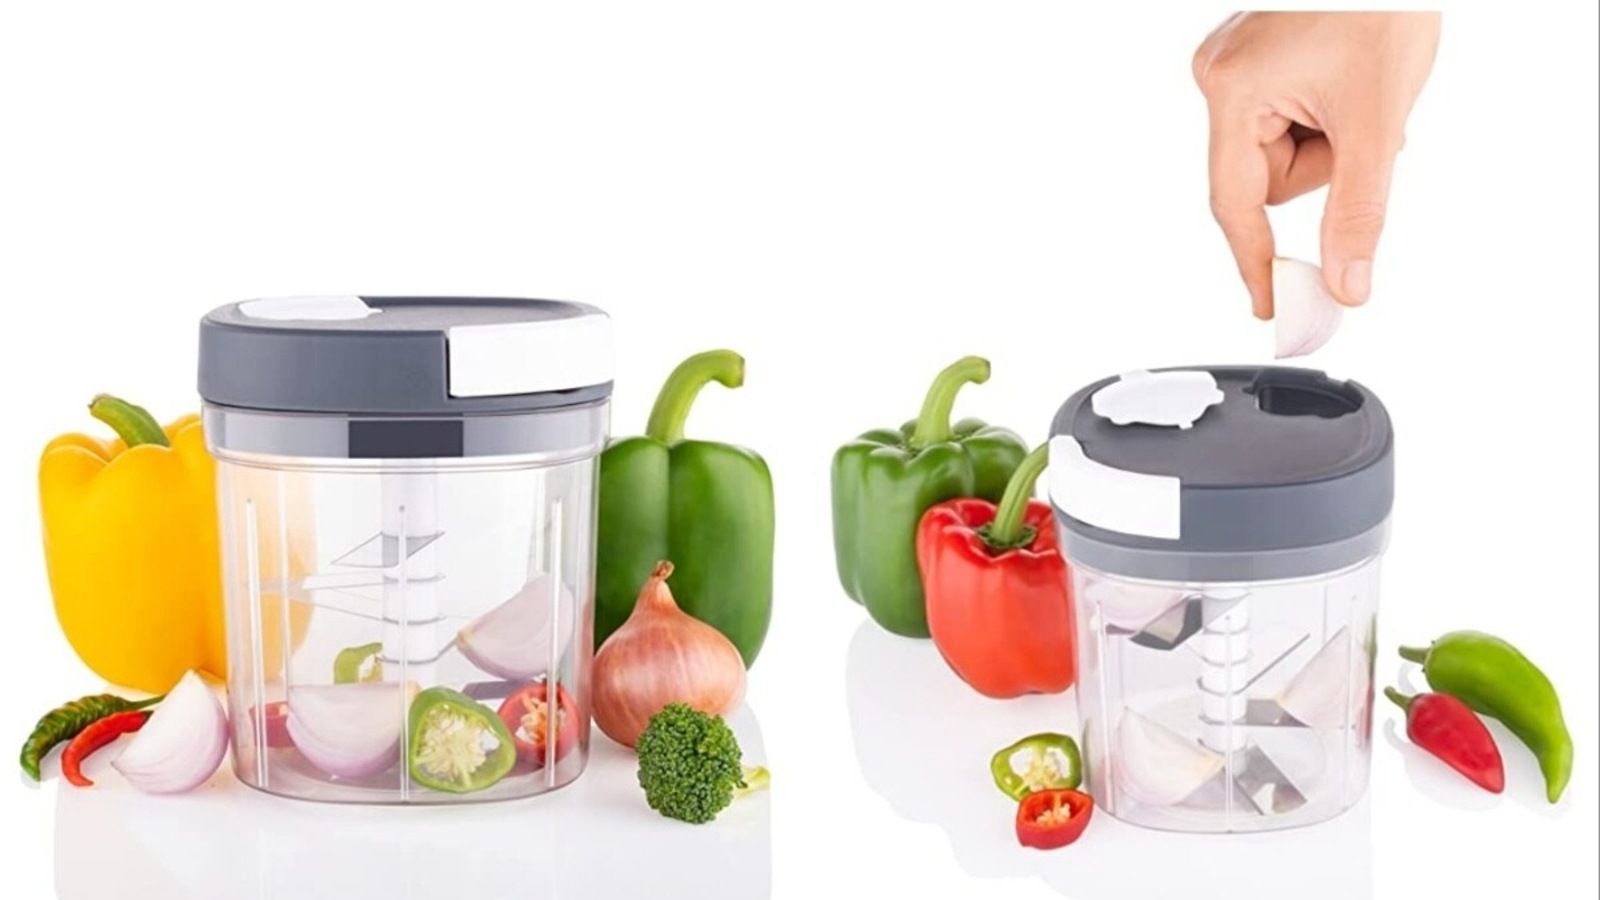 Pigeon Chopper Vegetable Chopper | Handy and Compact Manual Food Chopper  with Stainless Steel Blades | Large Hand Powered| Onion Chopper